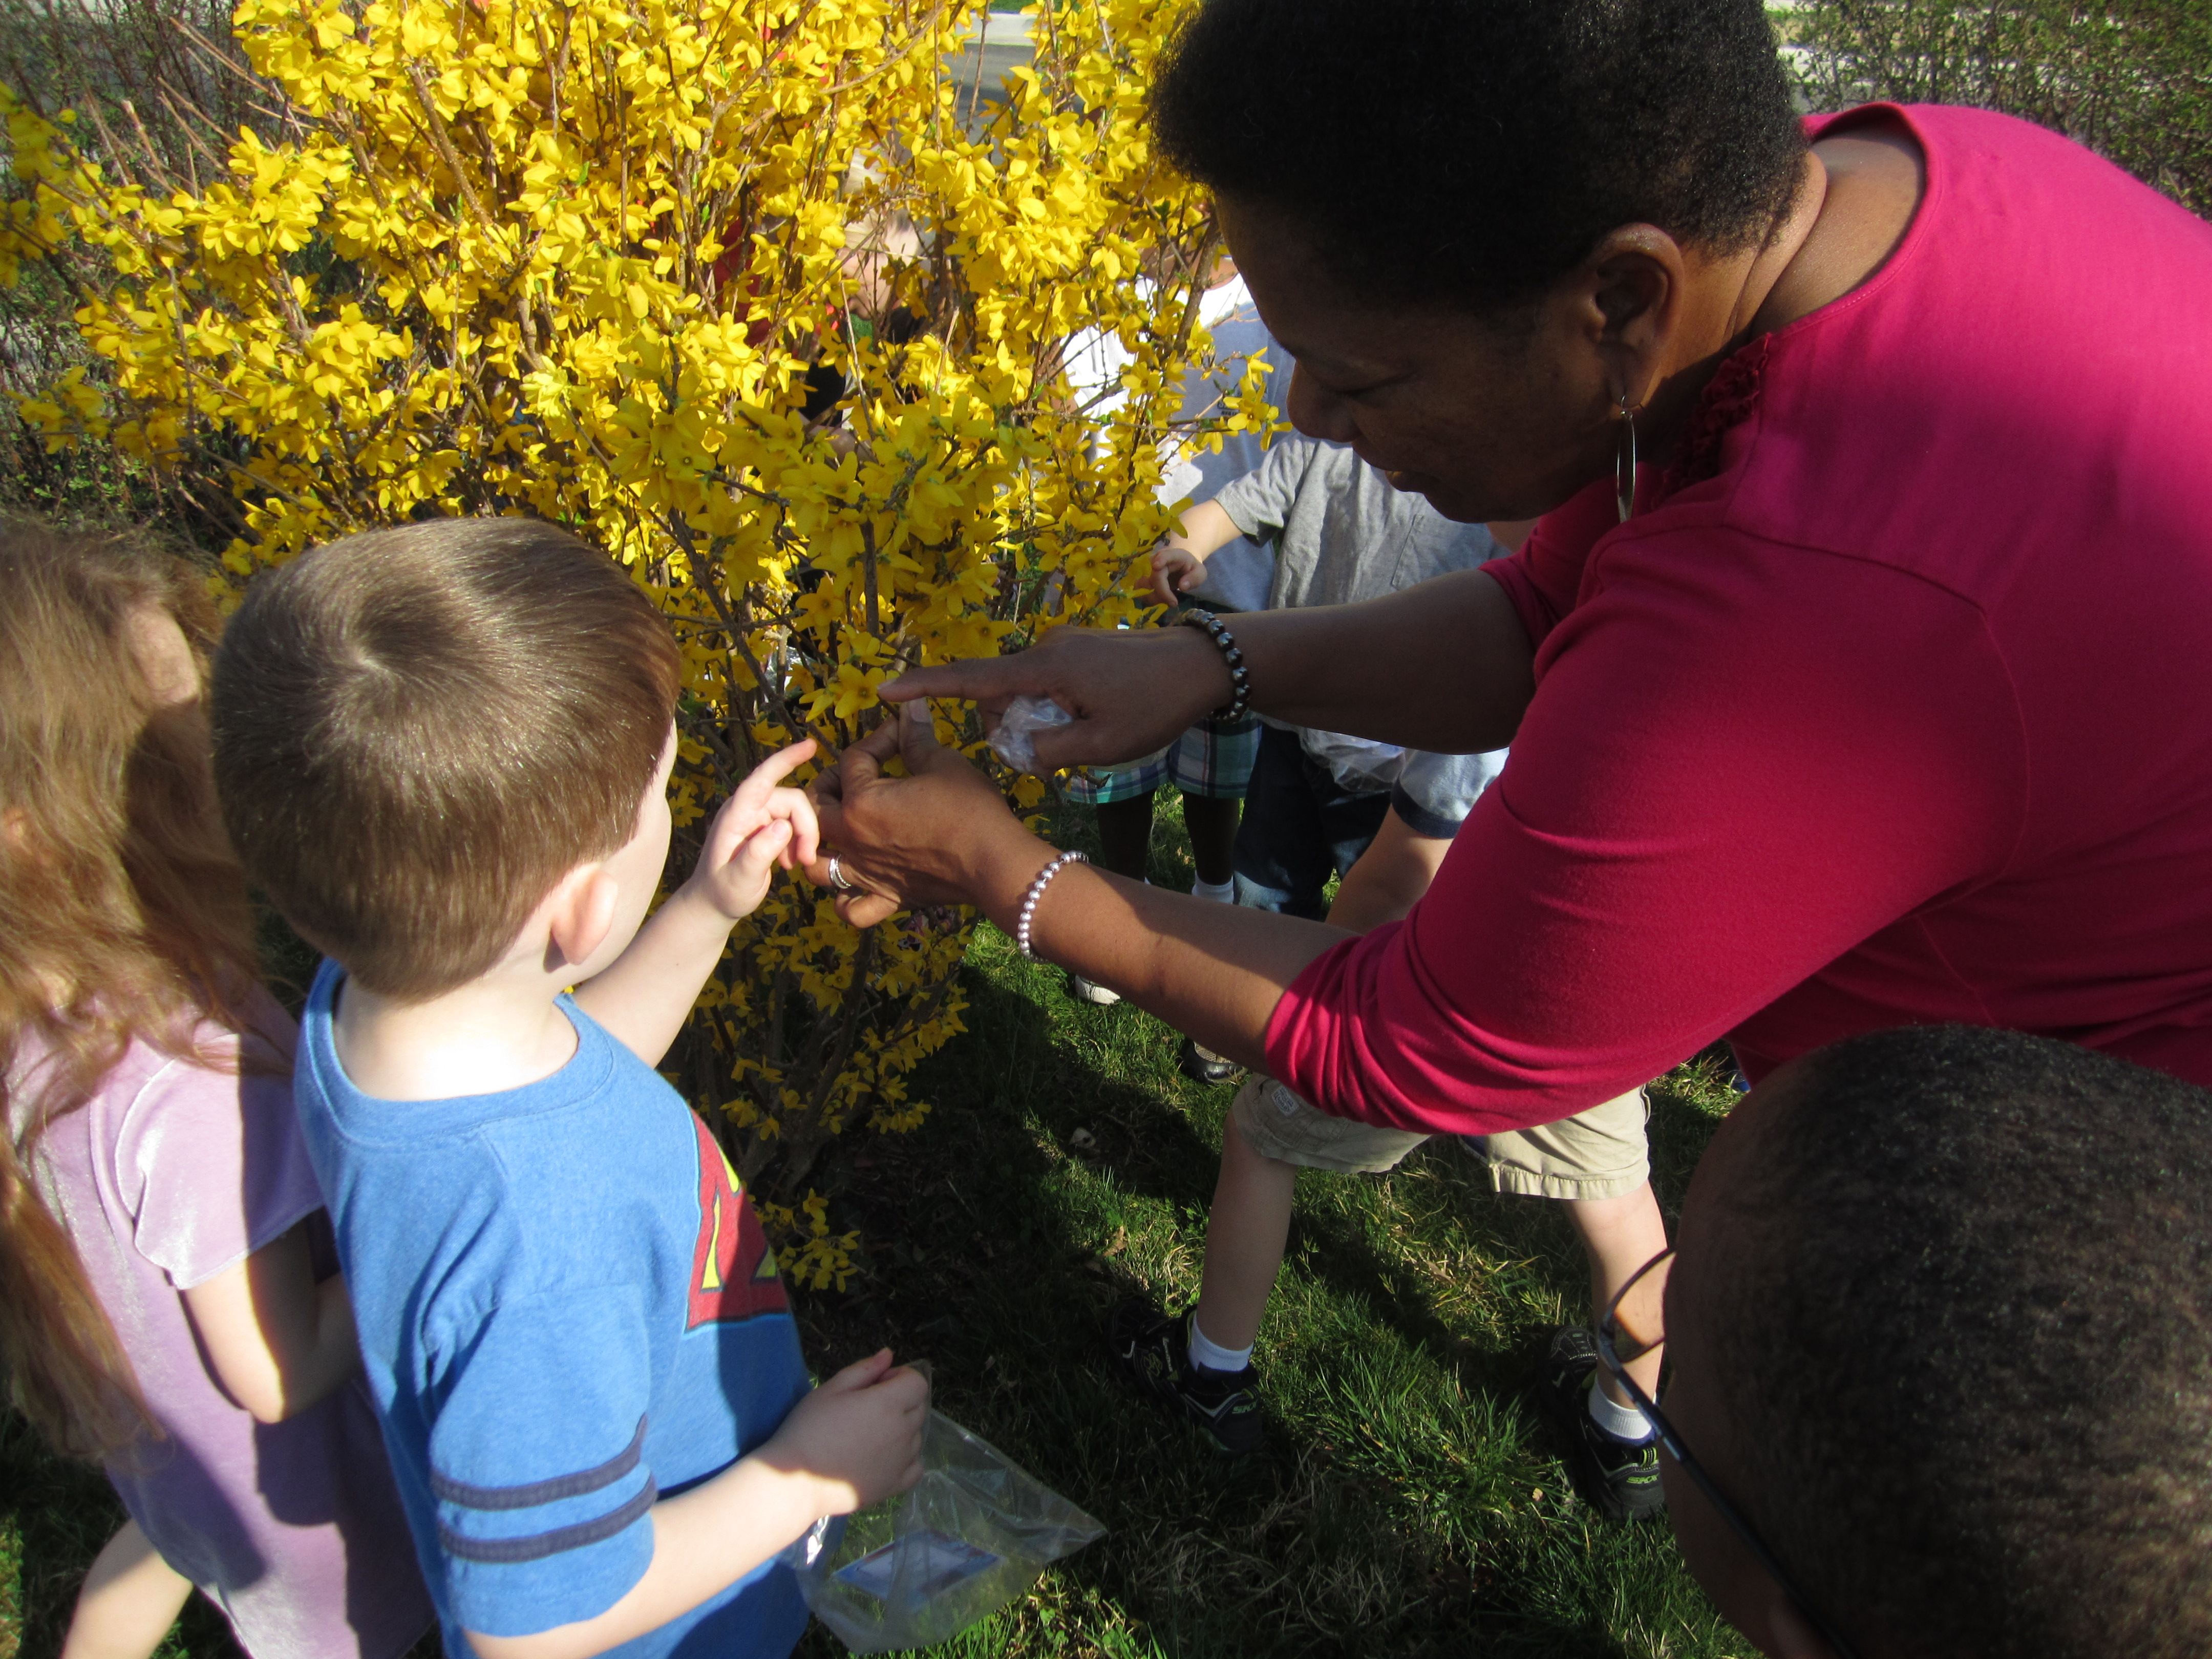 Teacher and child looking at forsythia bush flowers.